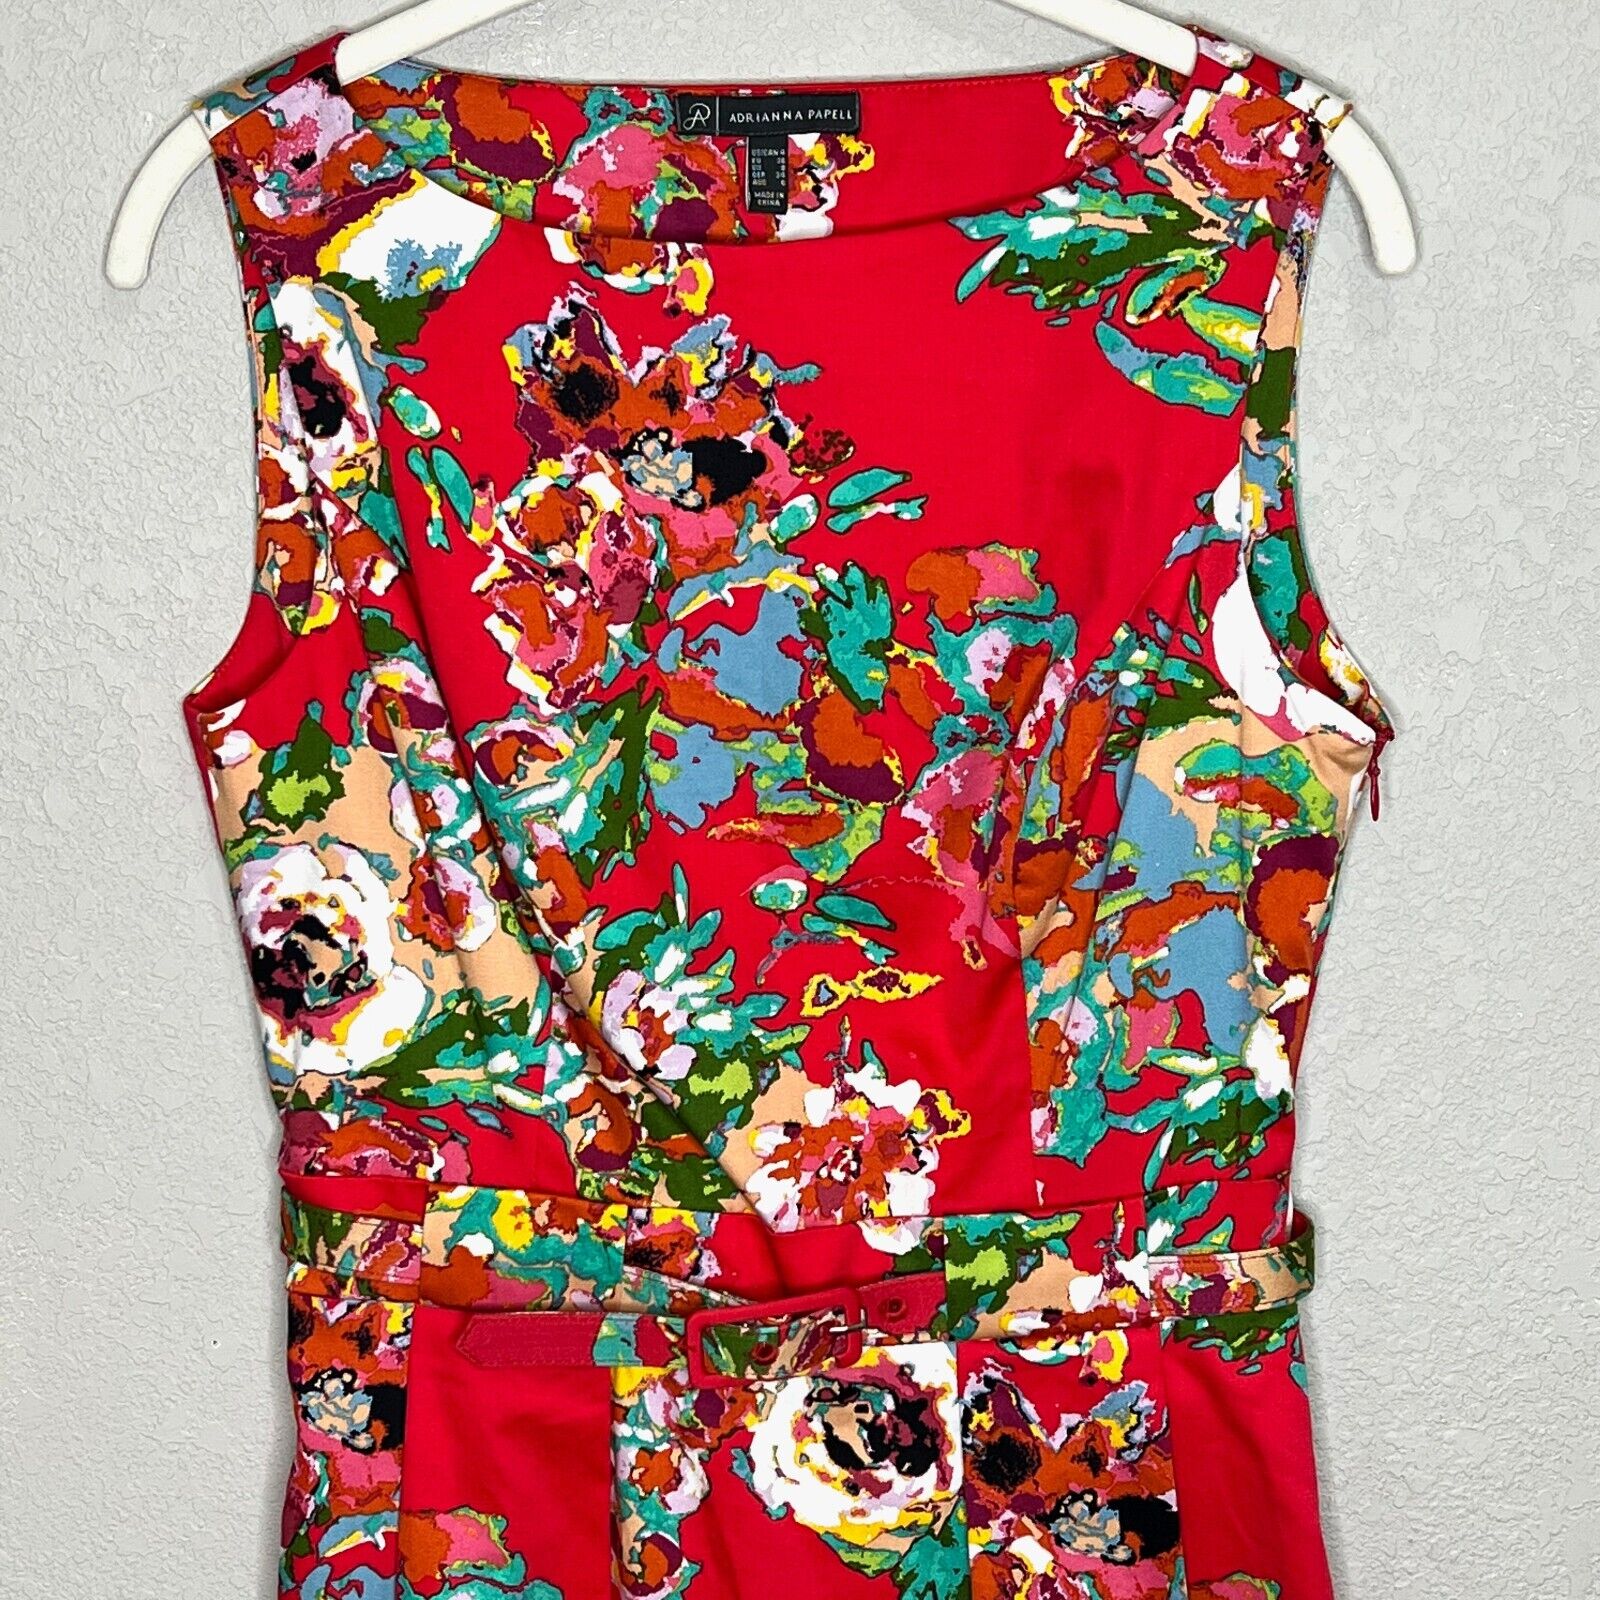 Adrianna Papell Sleeveless Red Floral Sleeveless Dress w Belted Waist Size 4